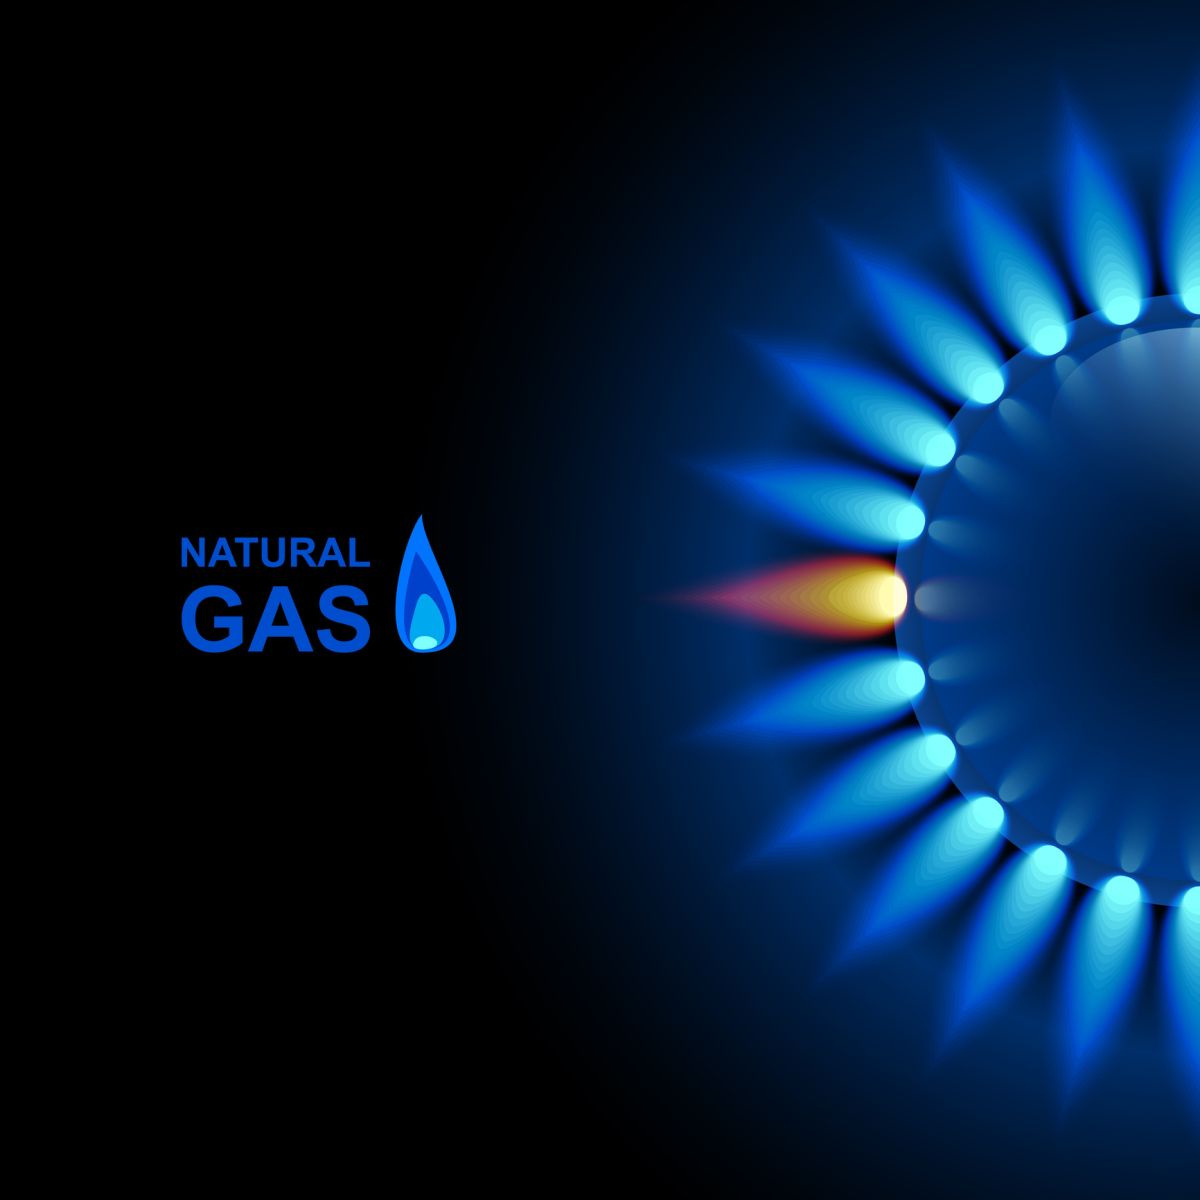 Natural Gas - Gas flame with blue reflection on dark backdrop by Bellanatella via iStock